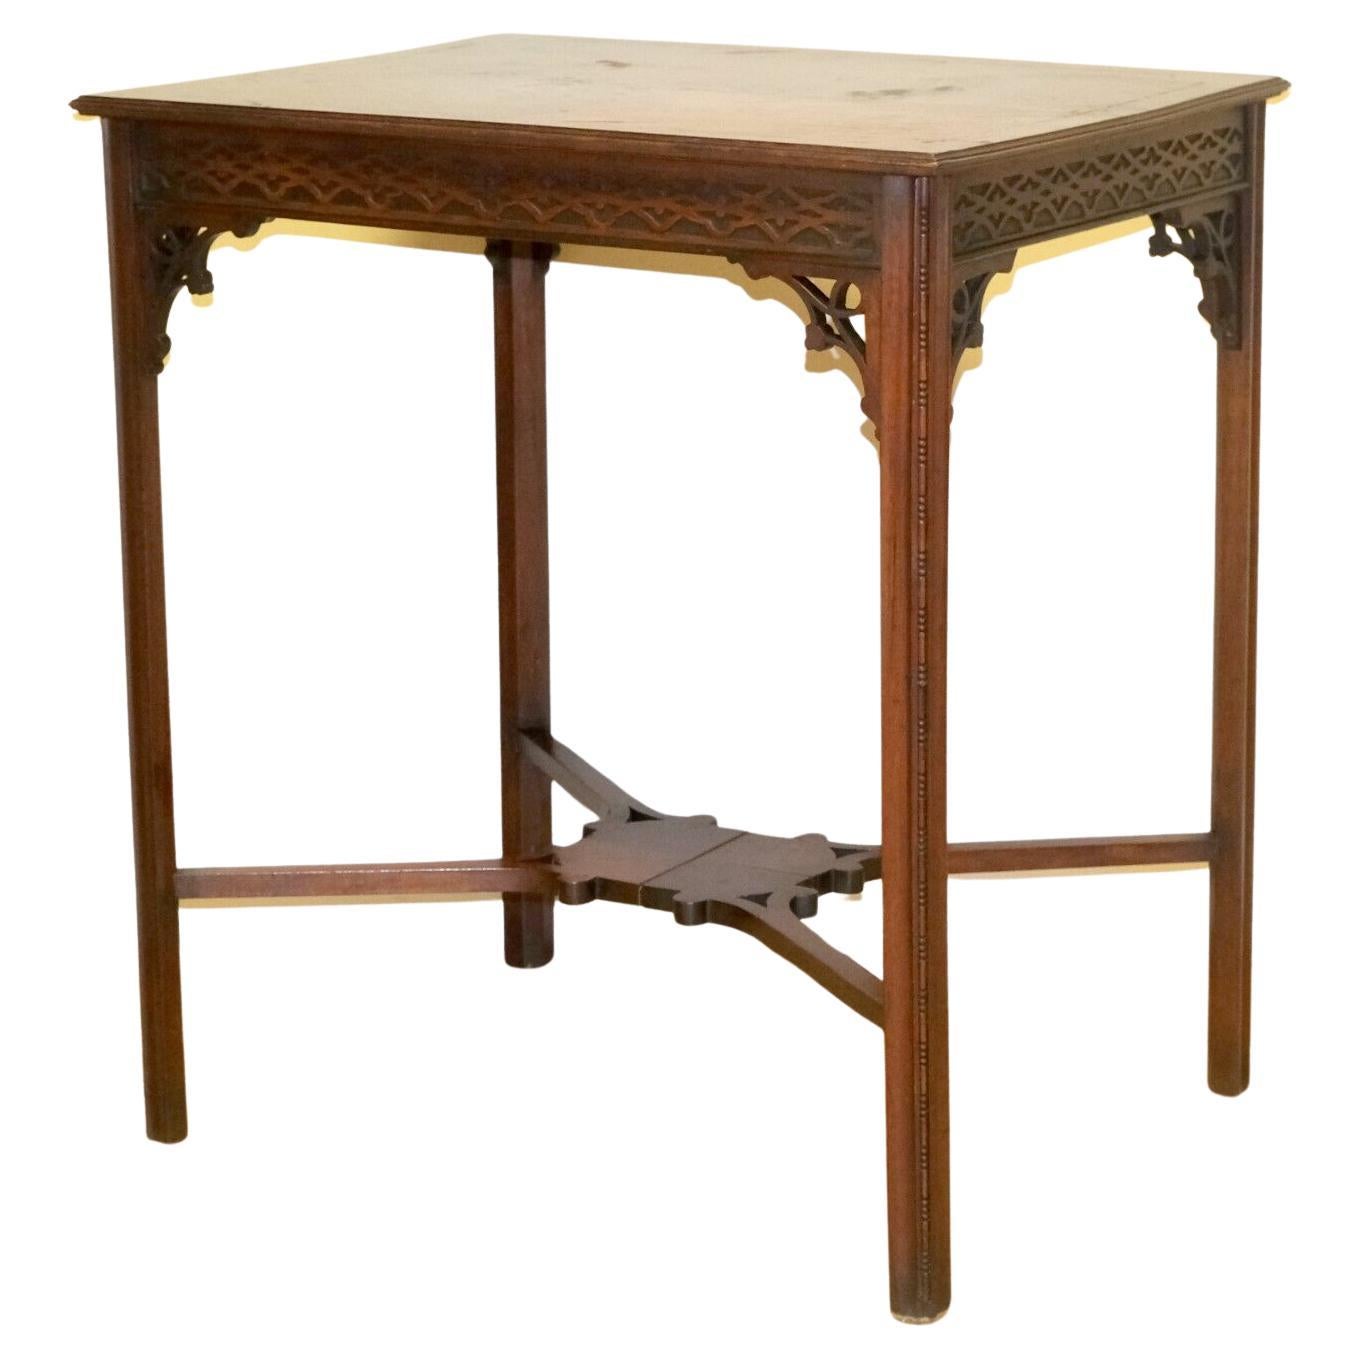 LOVELY ANTIQUE EDWARDIAN HARDWOOD SiDE TABLE STRAIGHT LEGS & CARVING For Sale